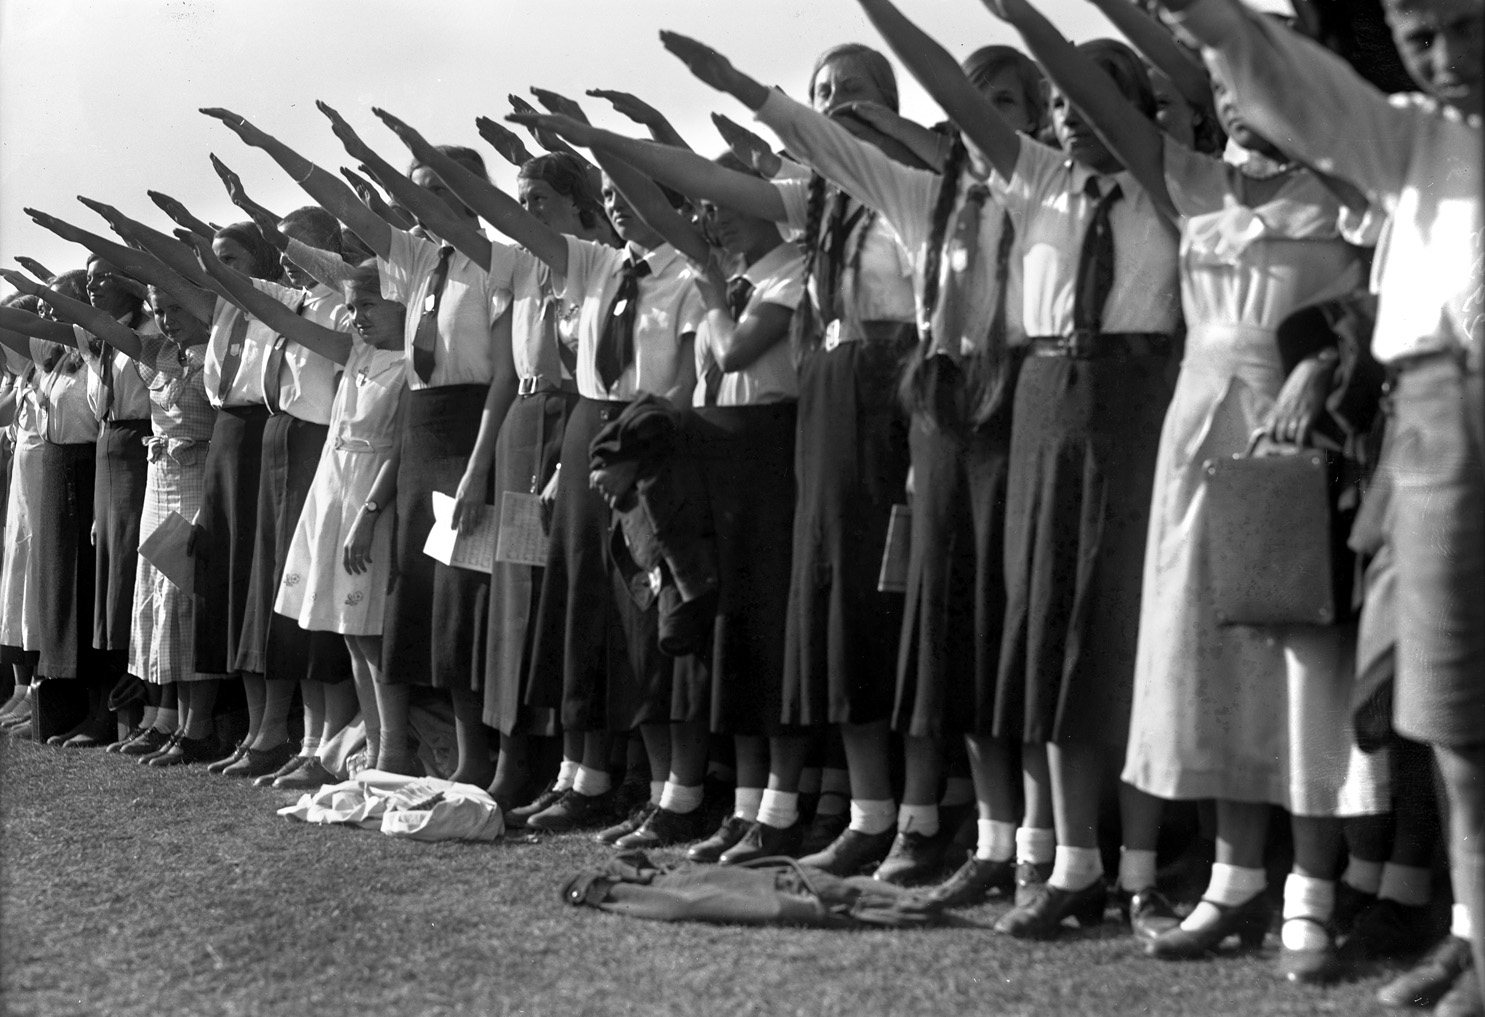 Uniformed girls of the BDM enthusiastically give the Nazi salute during a rally in Berlin in September 1933 that included 30,000 children.